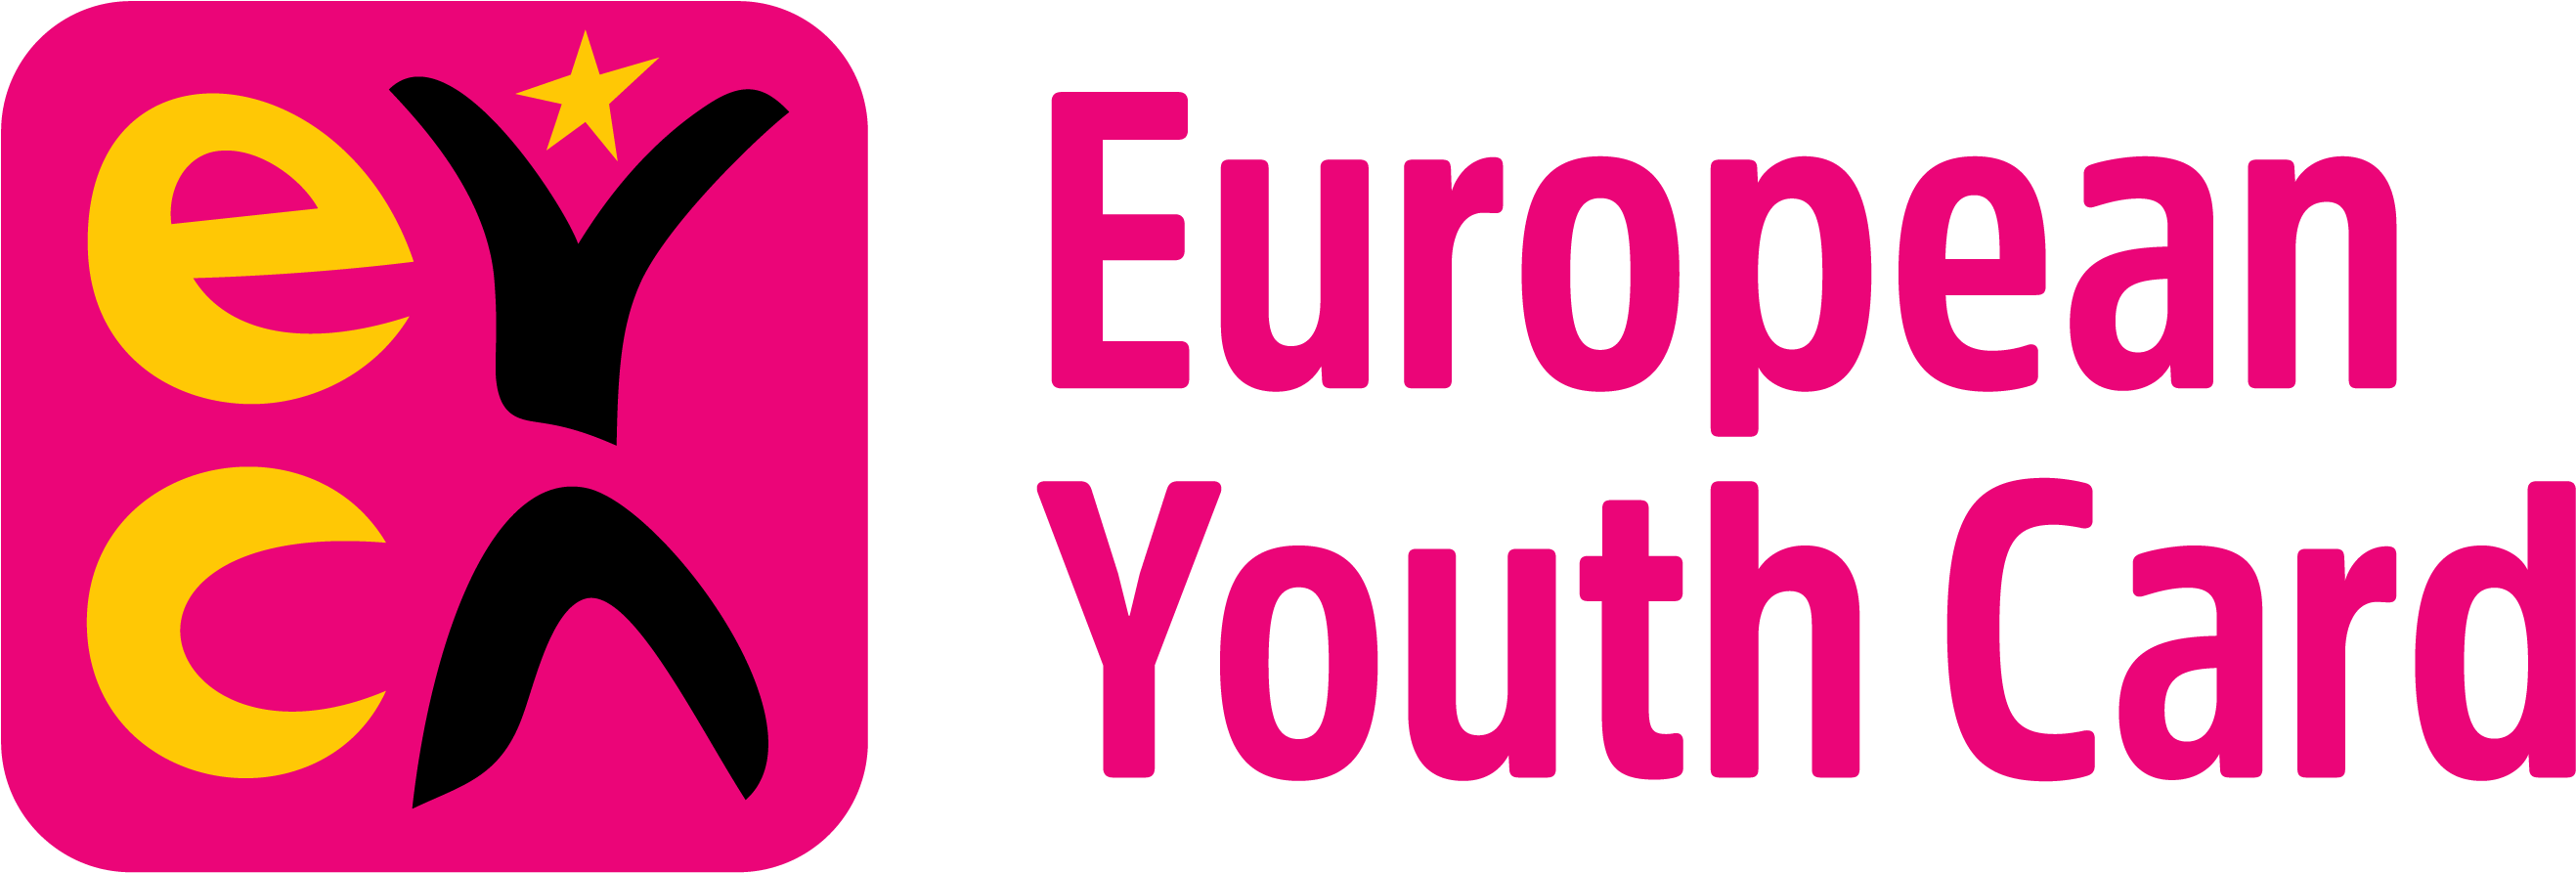 More Information About The Kind Of Discounts You Can - European Youth Card (3508x1762), Png Download